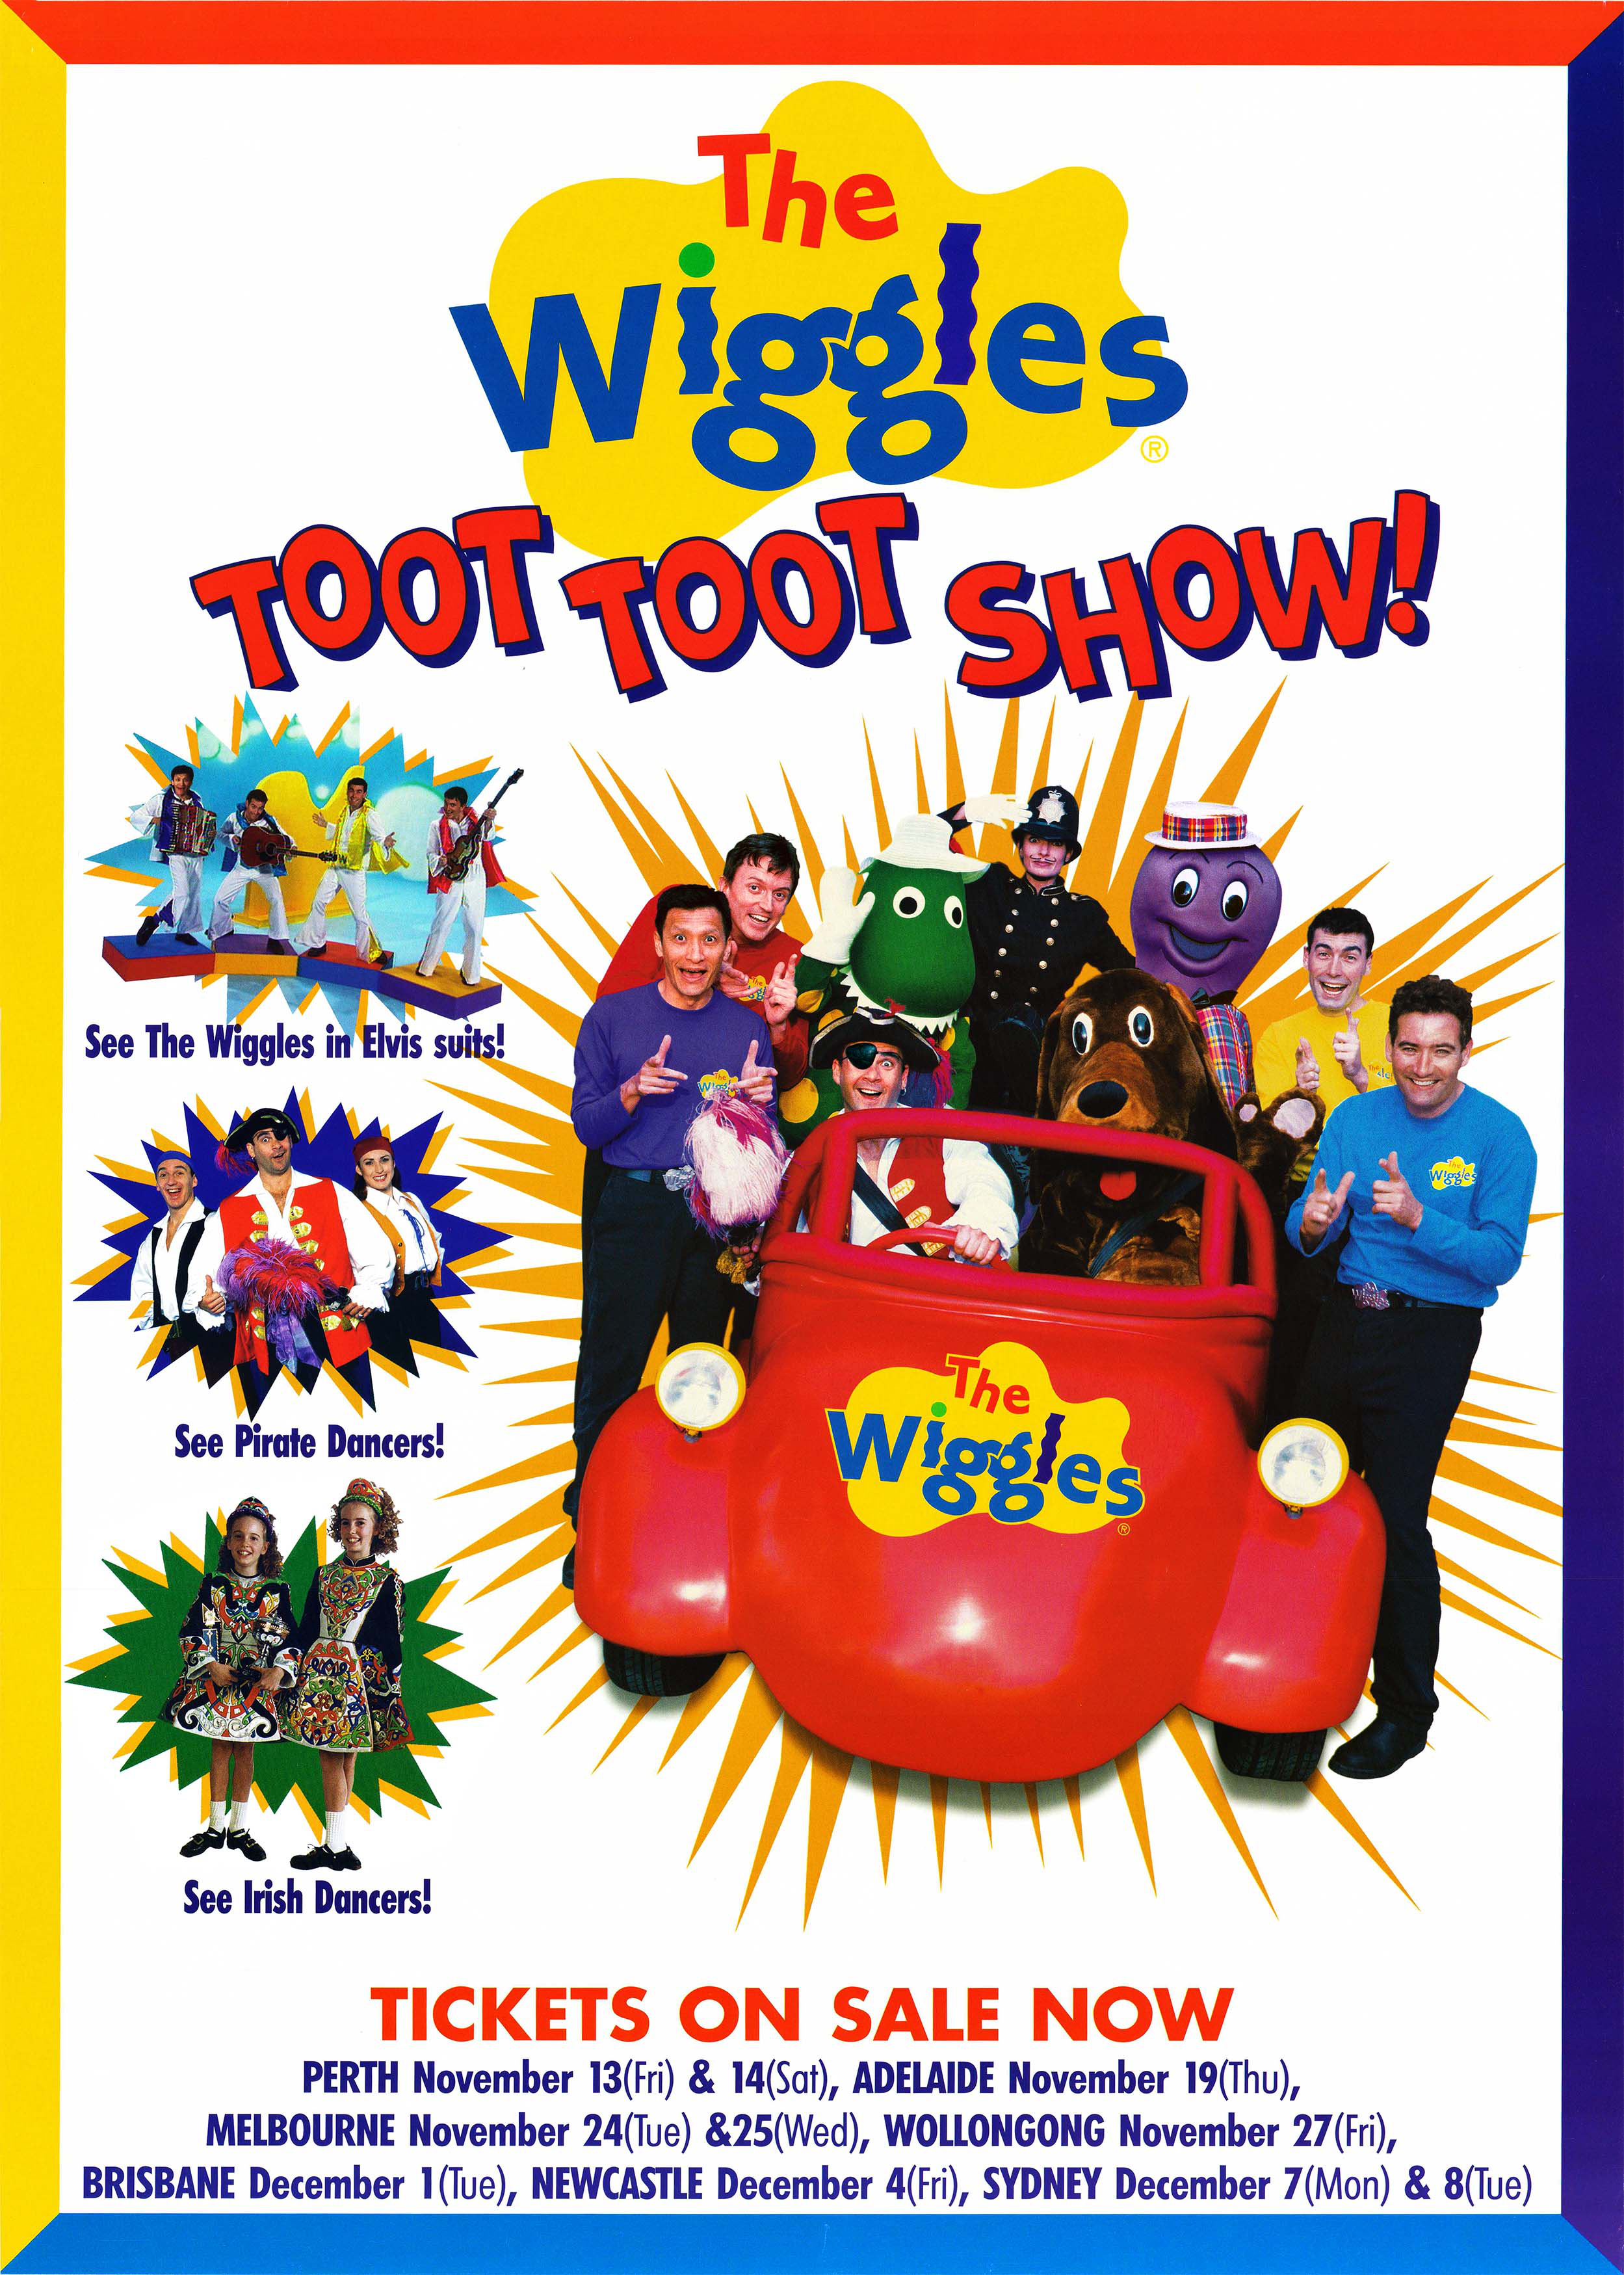 Toot Toot Show Tour Poster (Lizzio).png